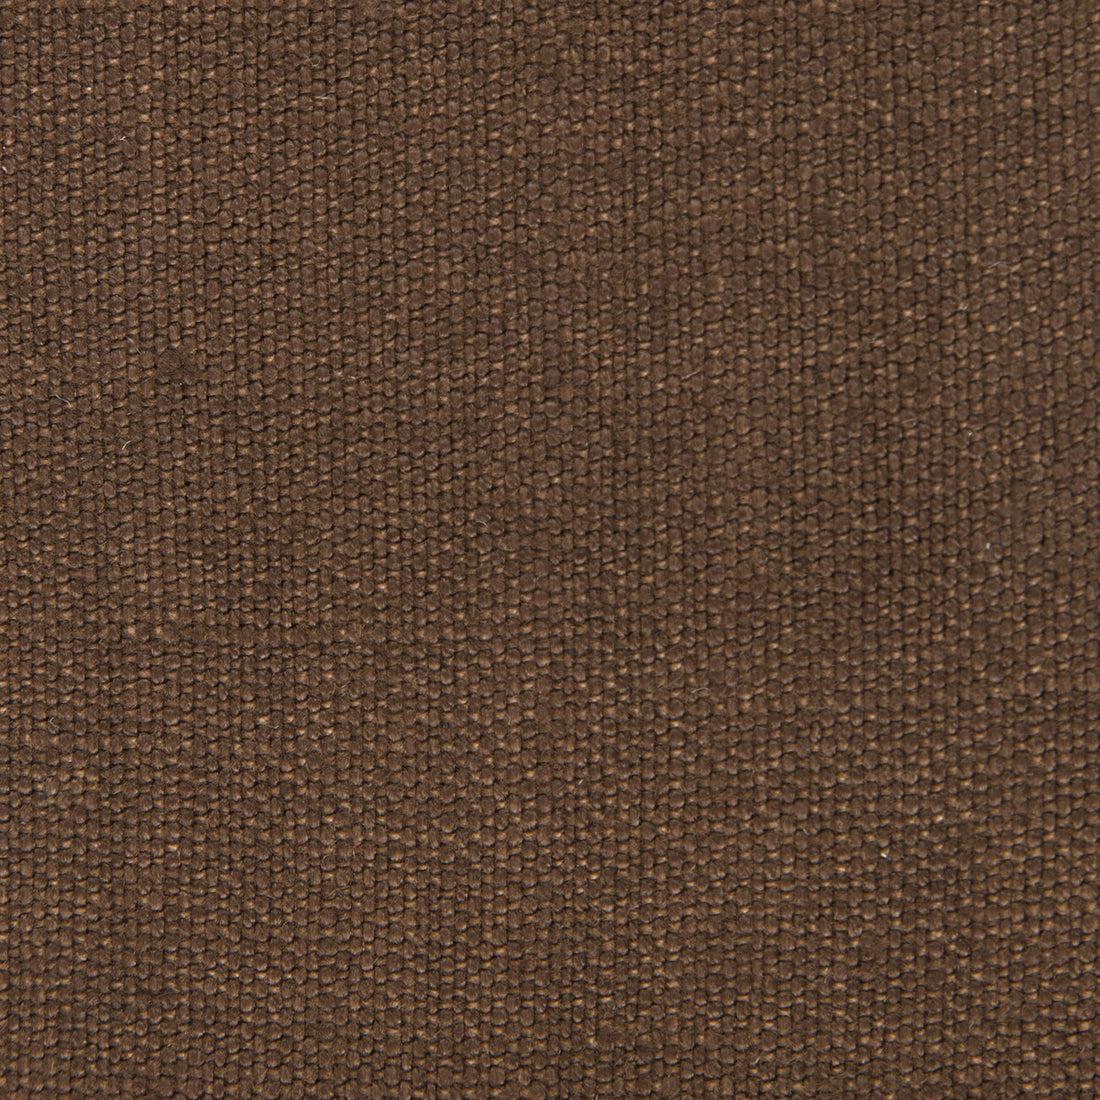 Nicaragua fabric in tabaco color - pattern GDT5239.029.0 - by Gaston y Daniela in the Basics collection